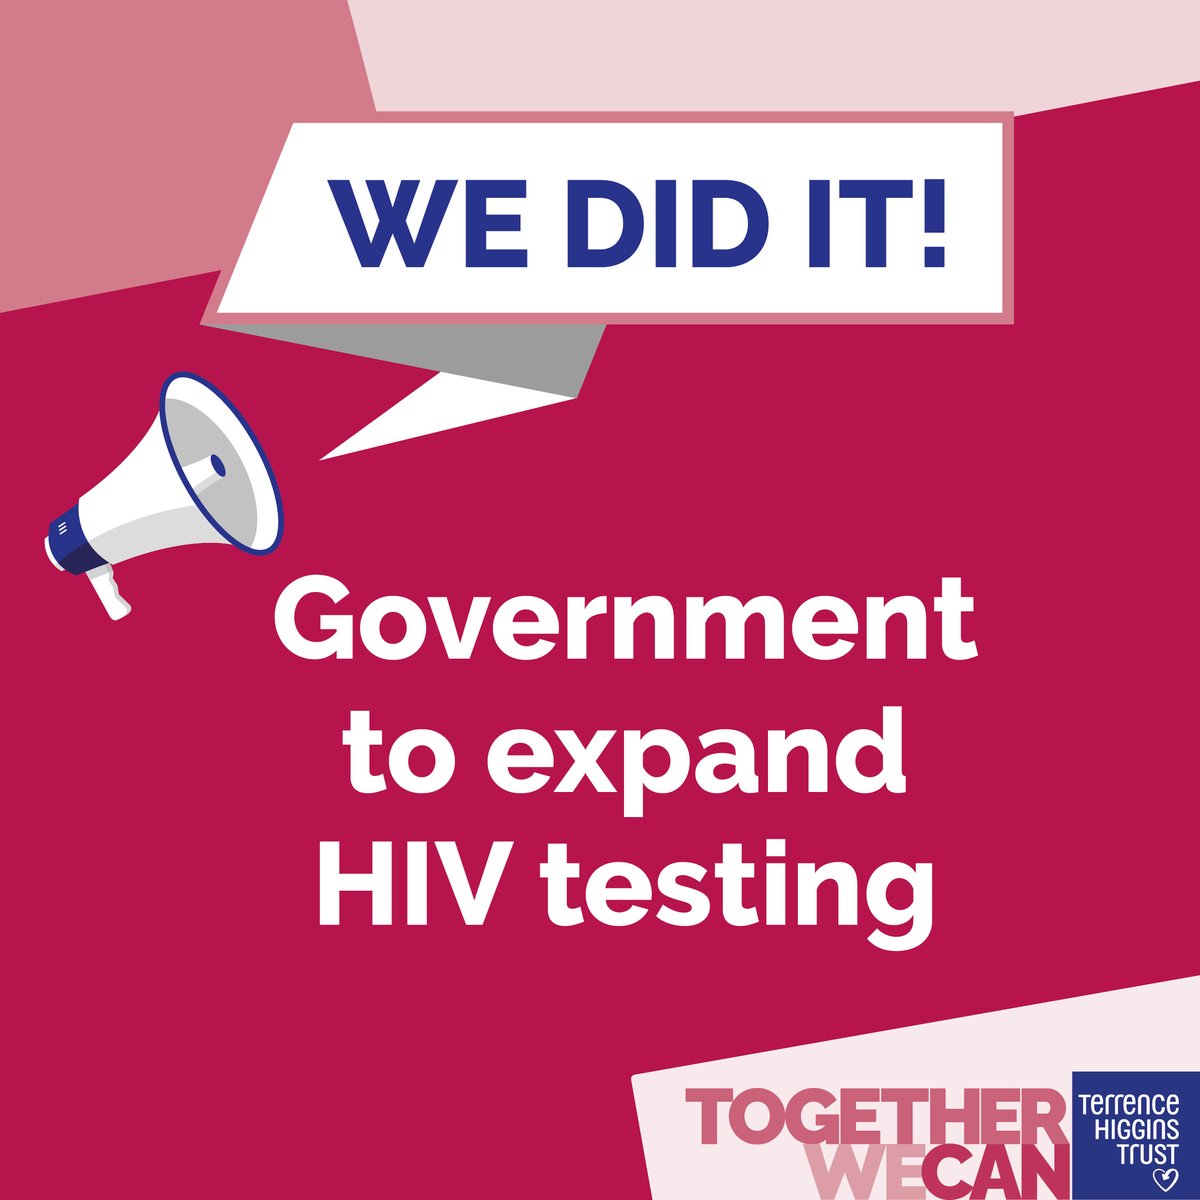 We did it! The Government will expand opt-out HIV testing to 46 more hospitals across England – millions more people will now be tested for HIV when they go to A&E. Alongside our incredible partners and supporters, we campaigned hard for this and won. Here’s how we did it.